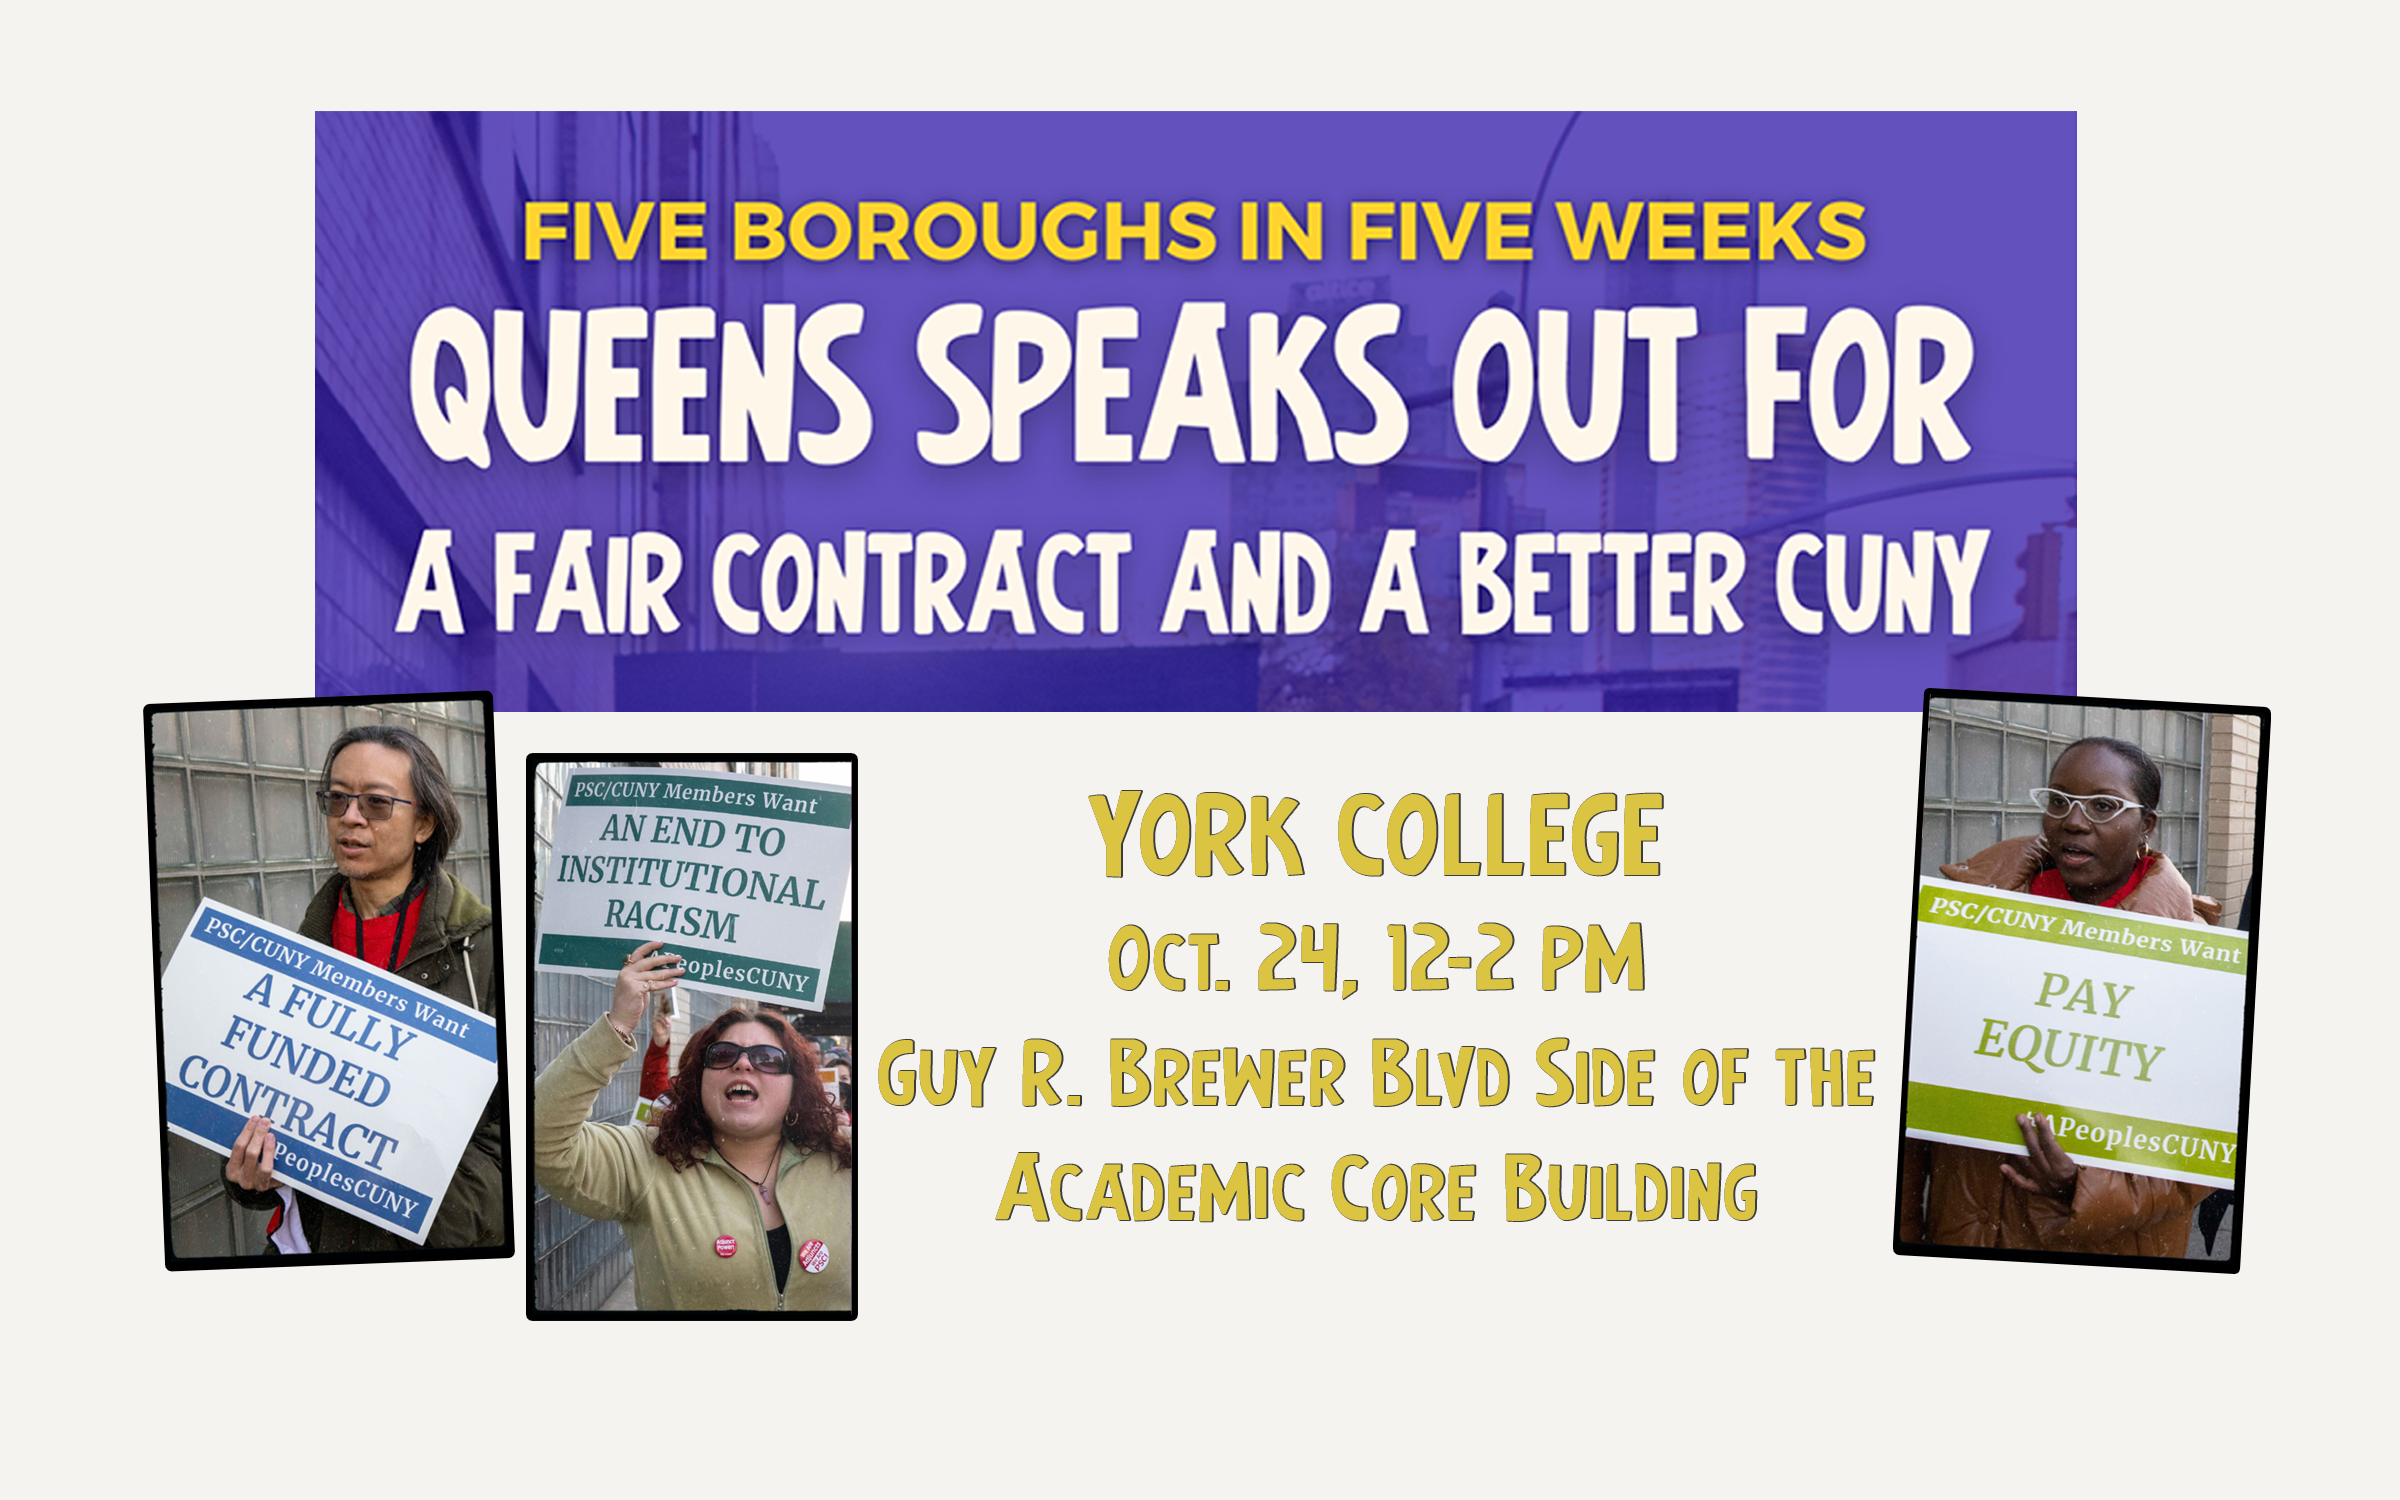 Queens Speak out event on Oct 24th at York College